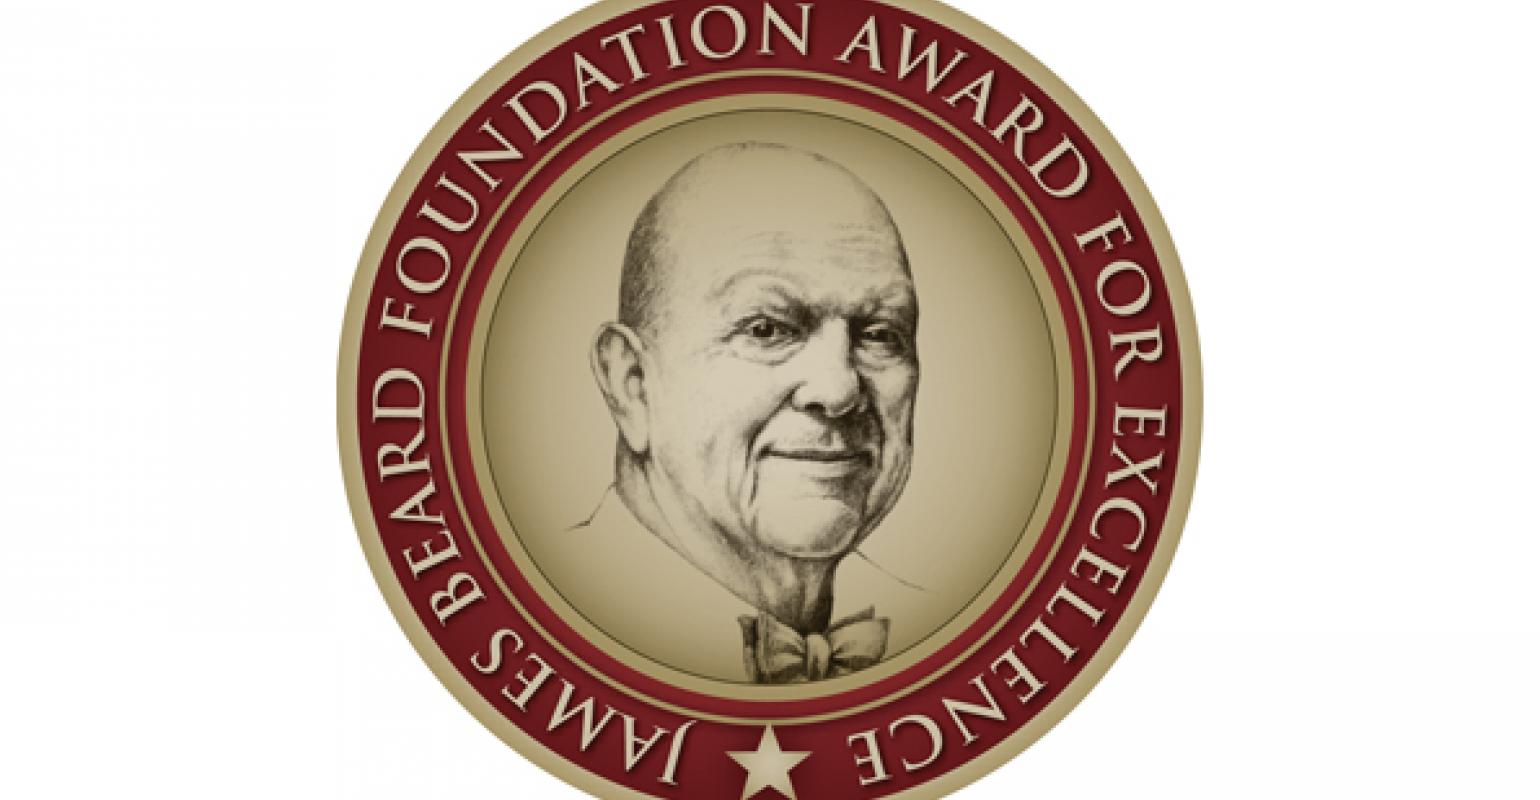 James Beard Awards to move to Chicago Nation's Restaurant News